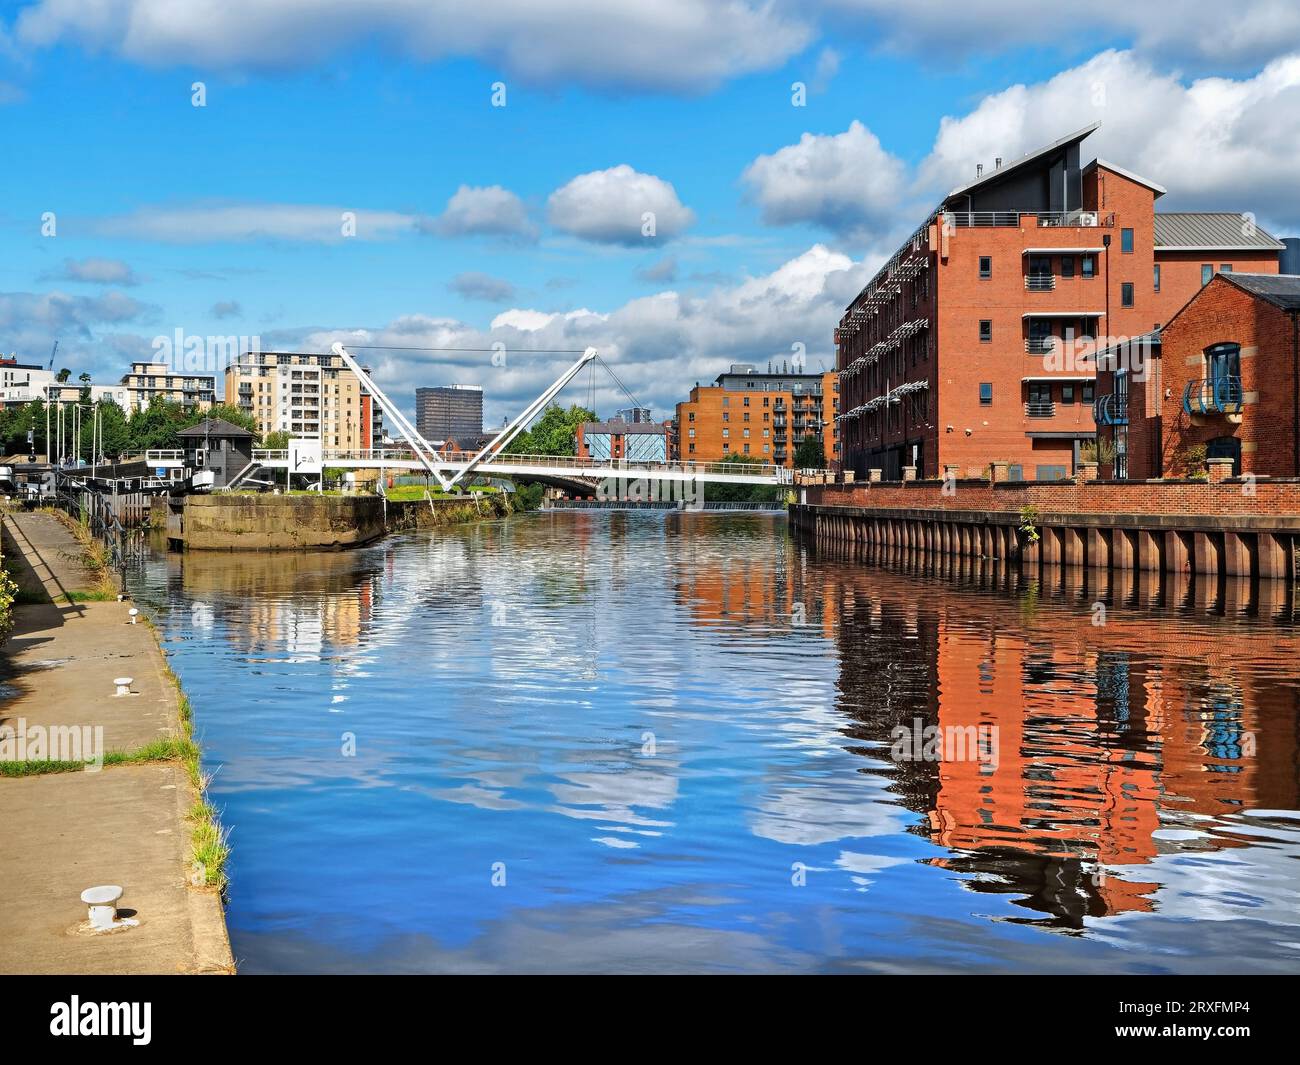 UK, West Yorkshire, Leeds Dock Apartments, River Aire and Knights Way Bridge from Towpath. Stock Photo